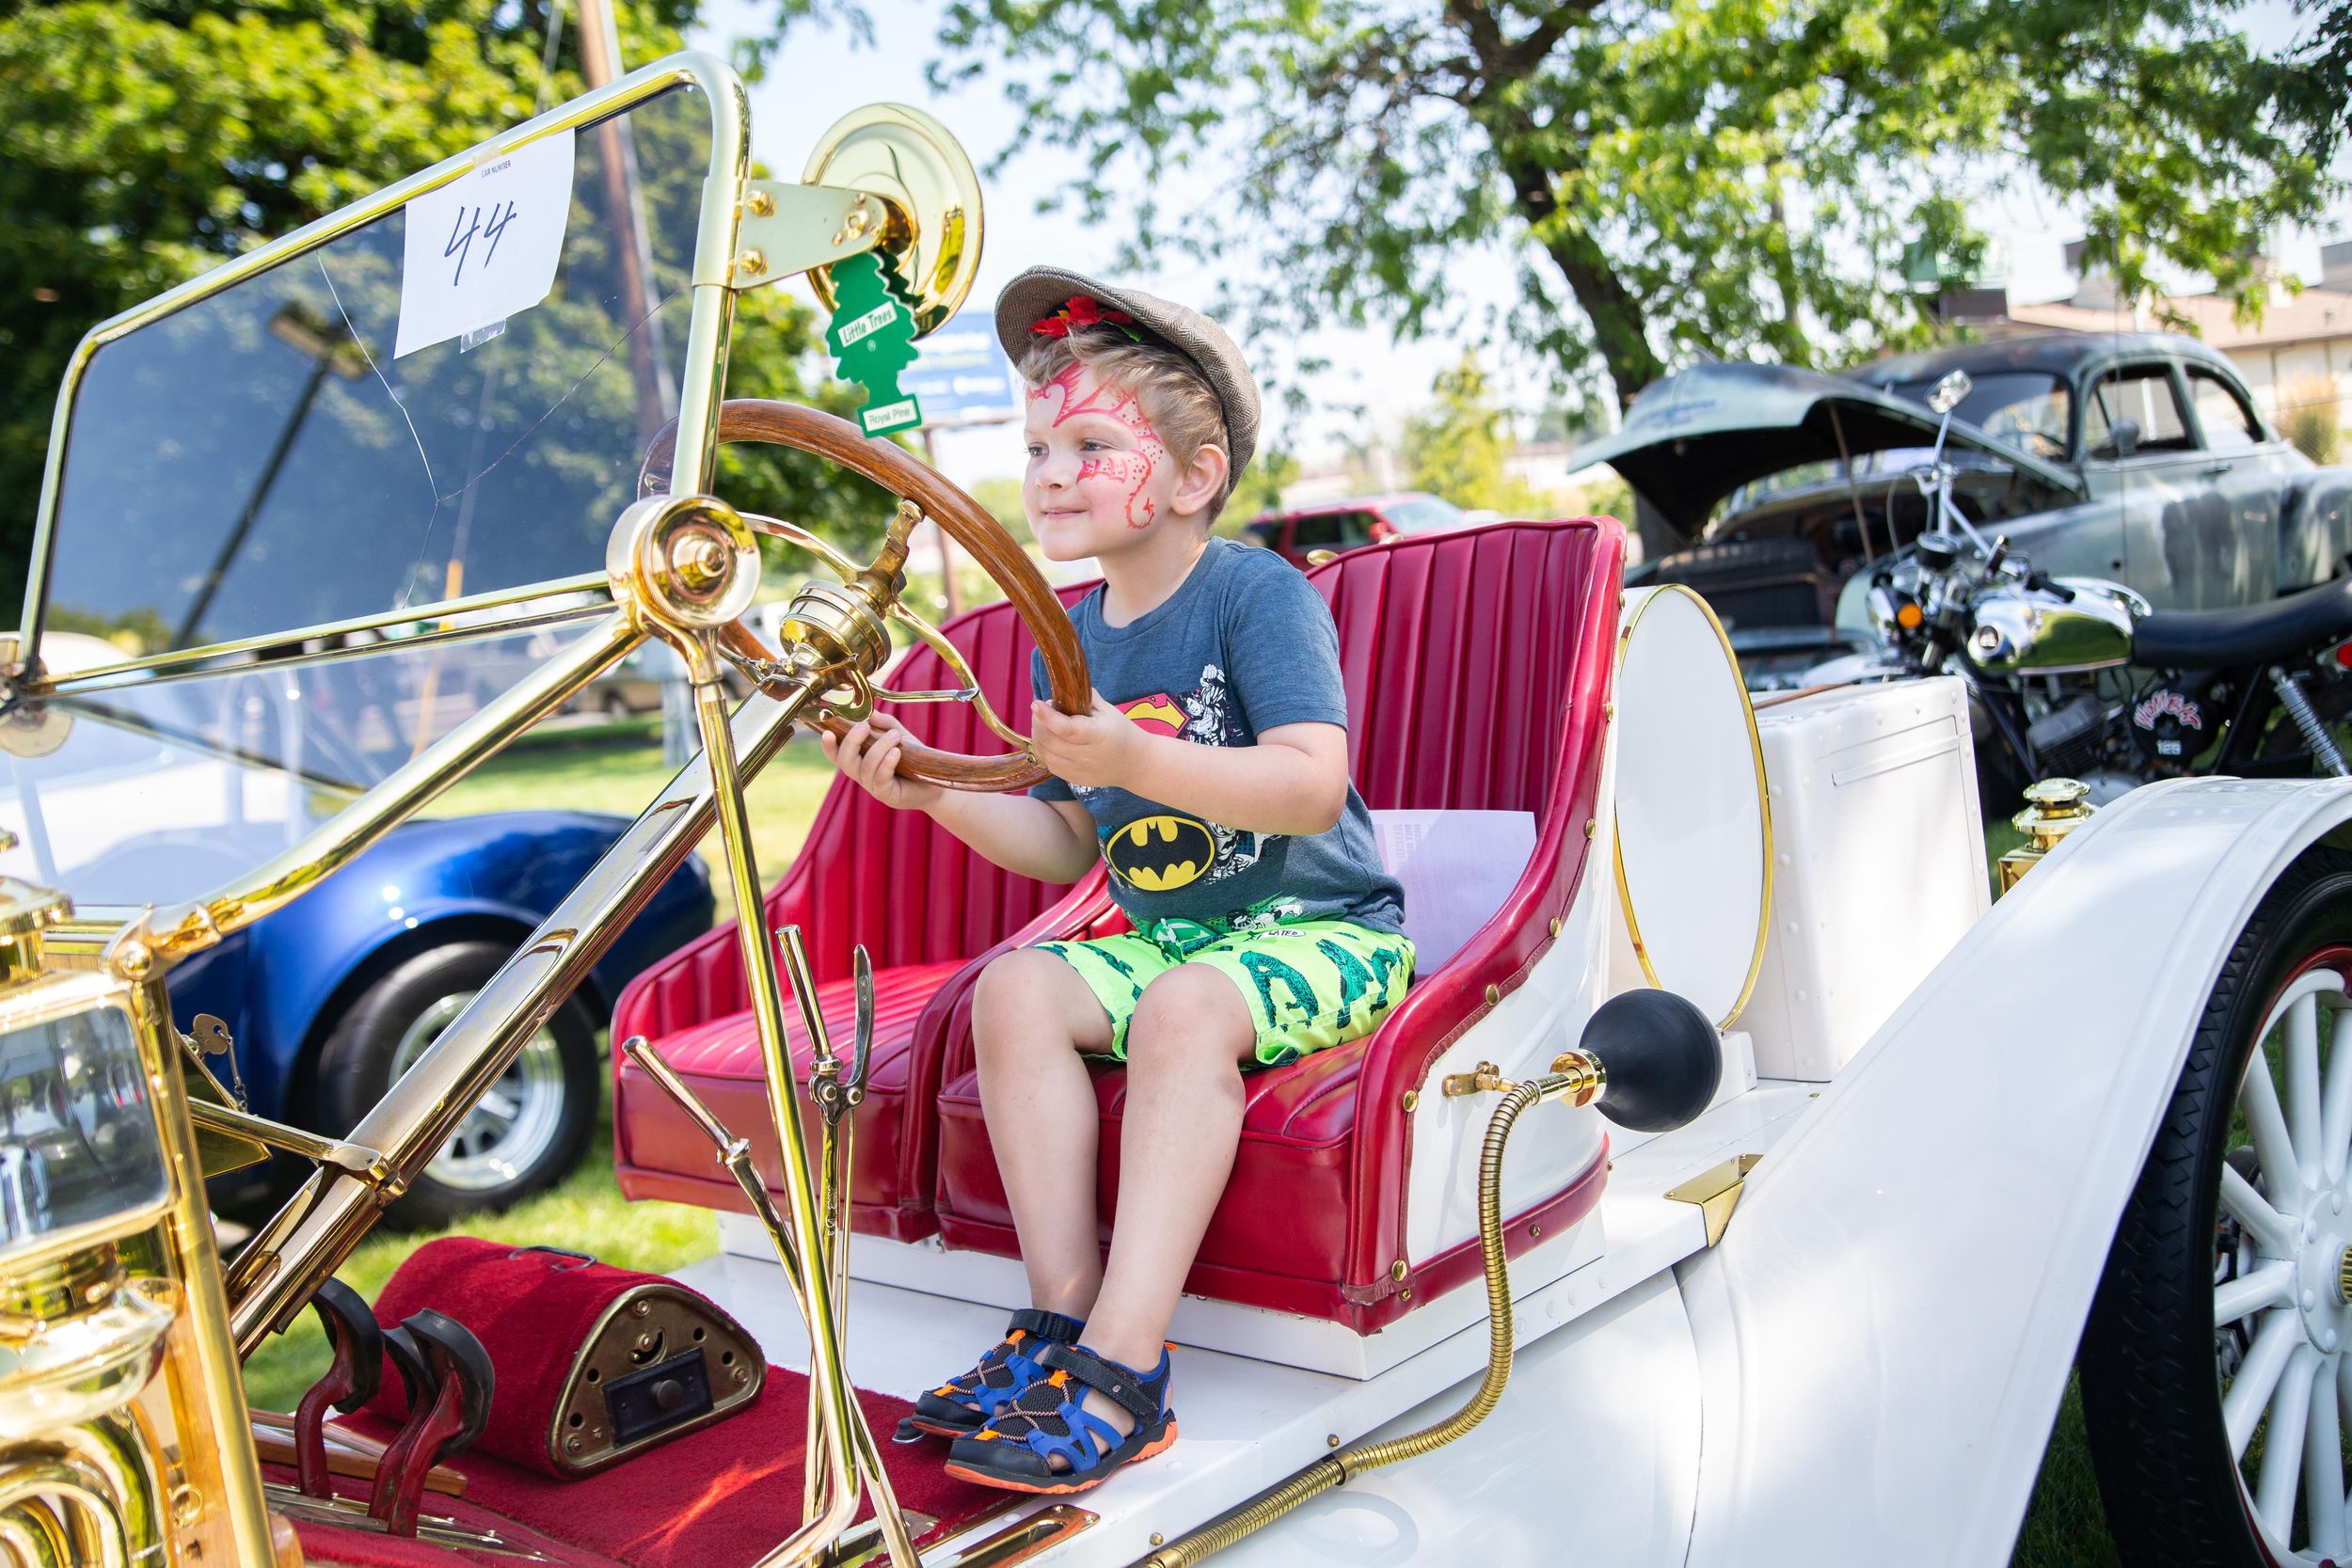 Hillyard Festival Aug. 4, 2019 The SpokesmanReview